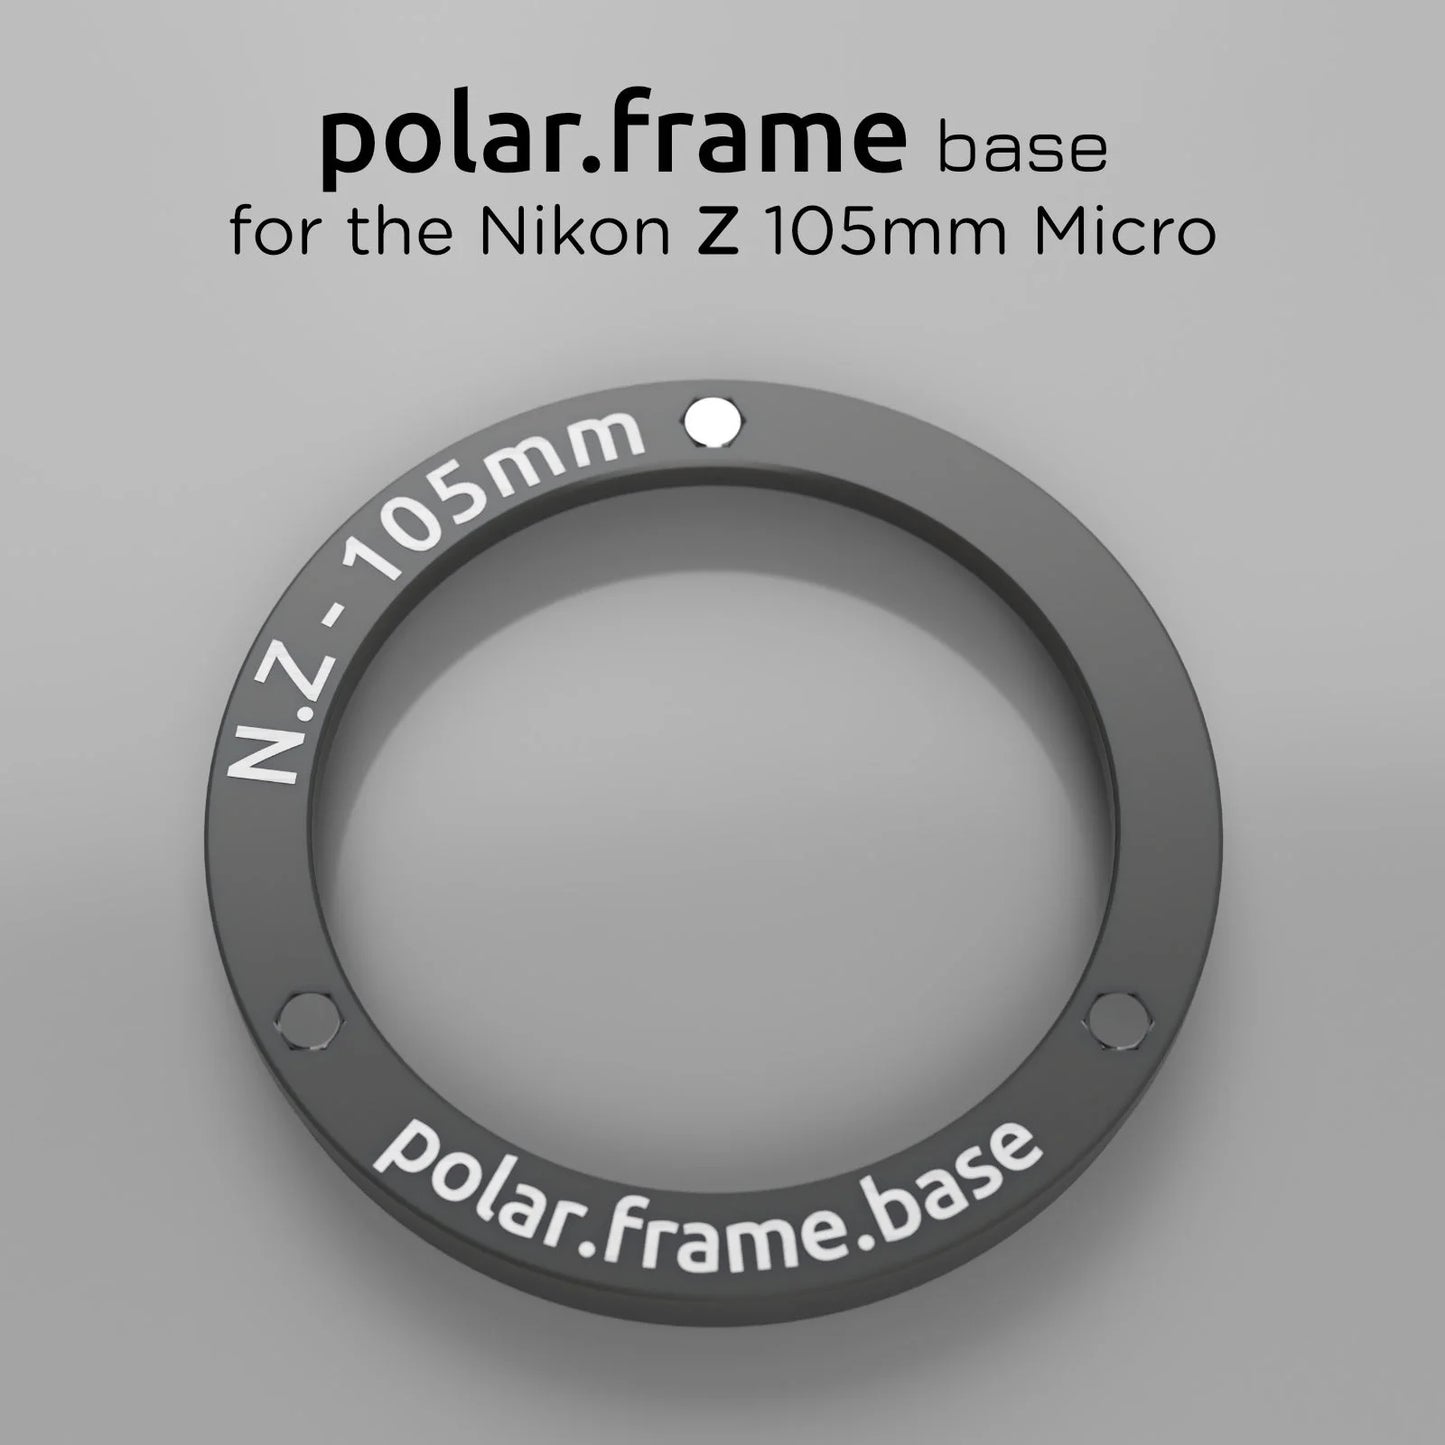 Extra adapter for the polar.frame